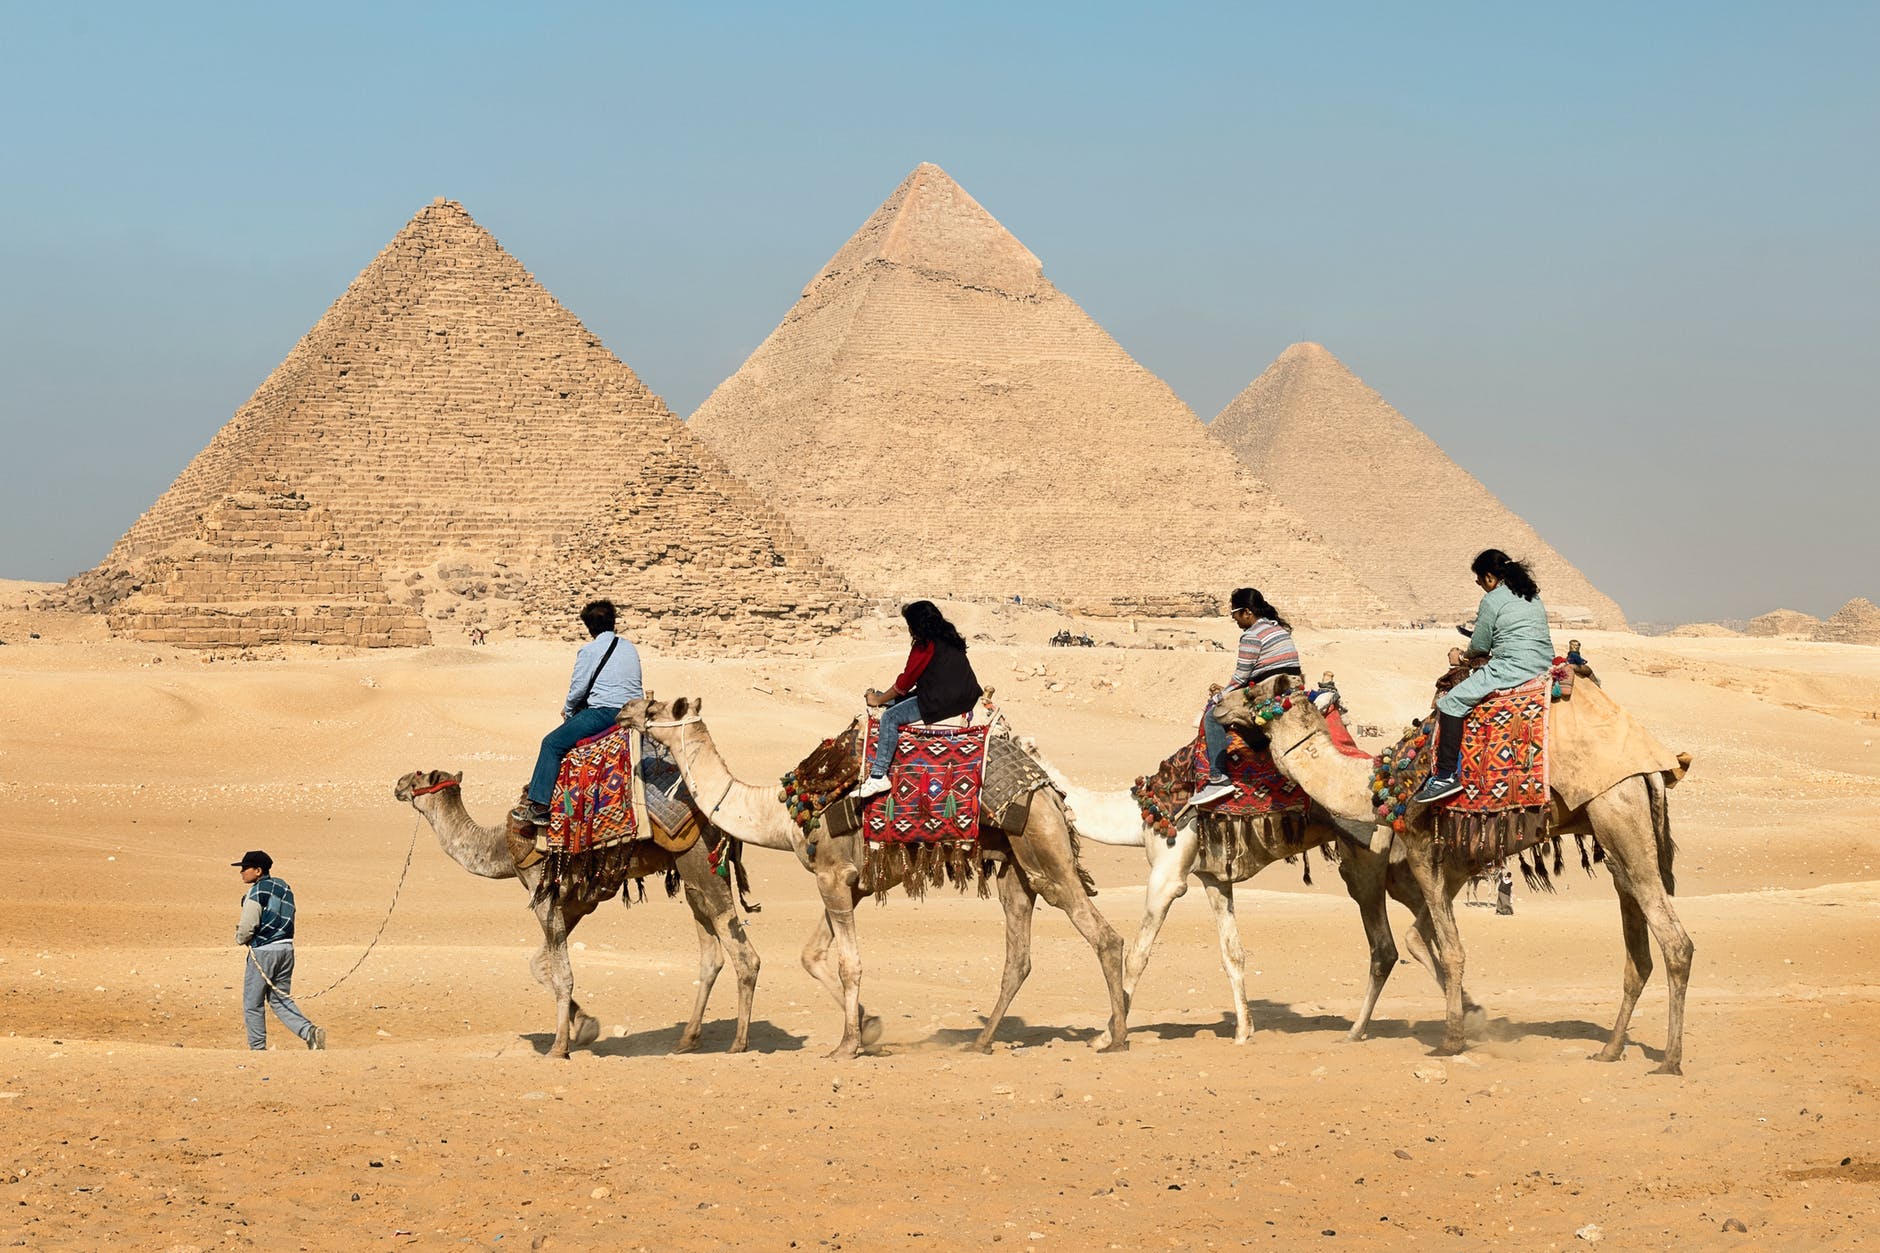 four people riding on camels across the pyramids